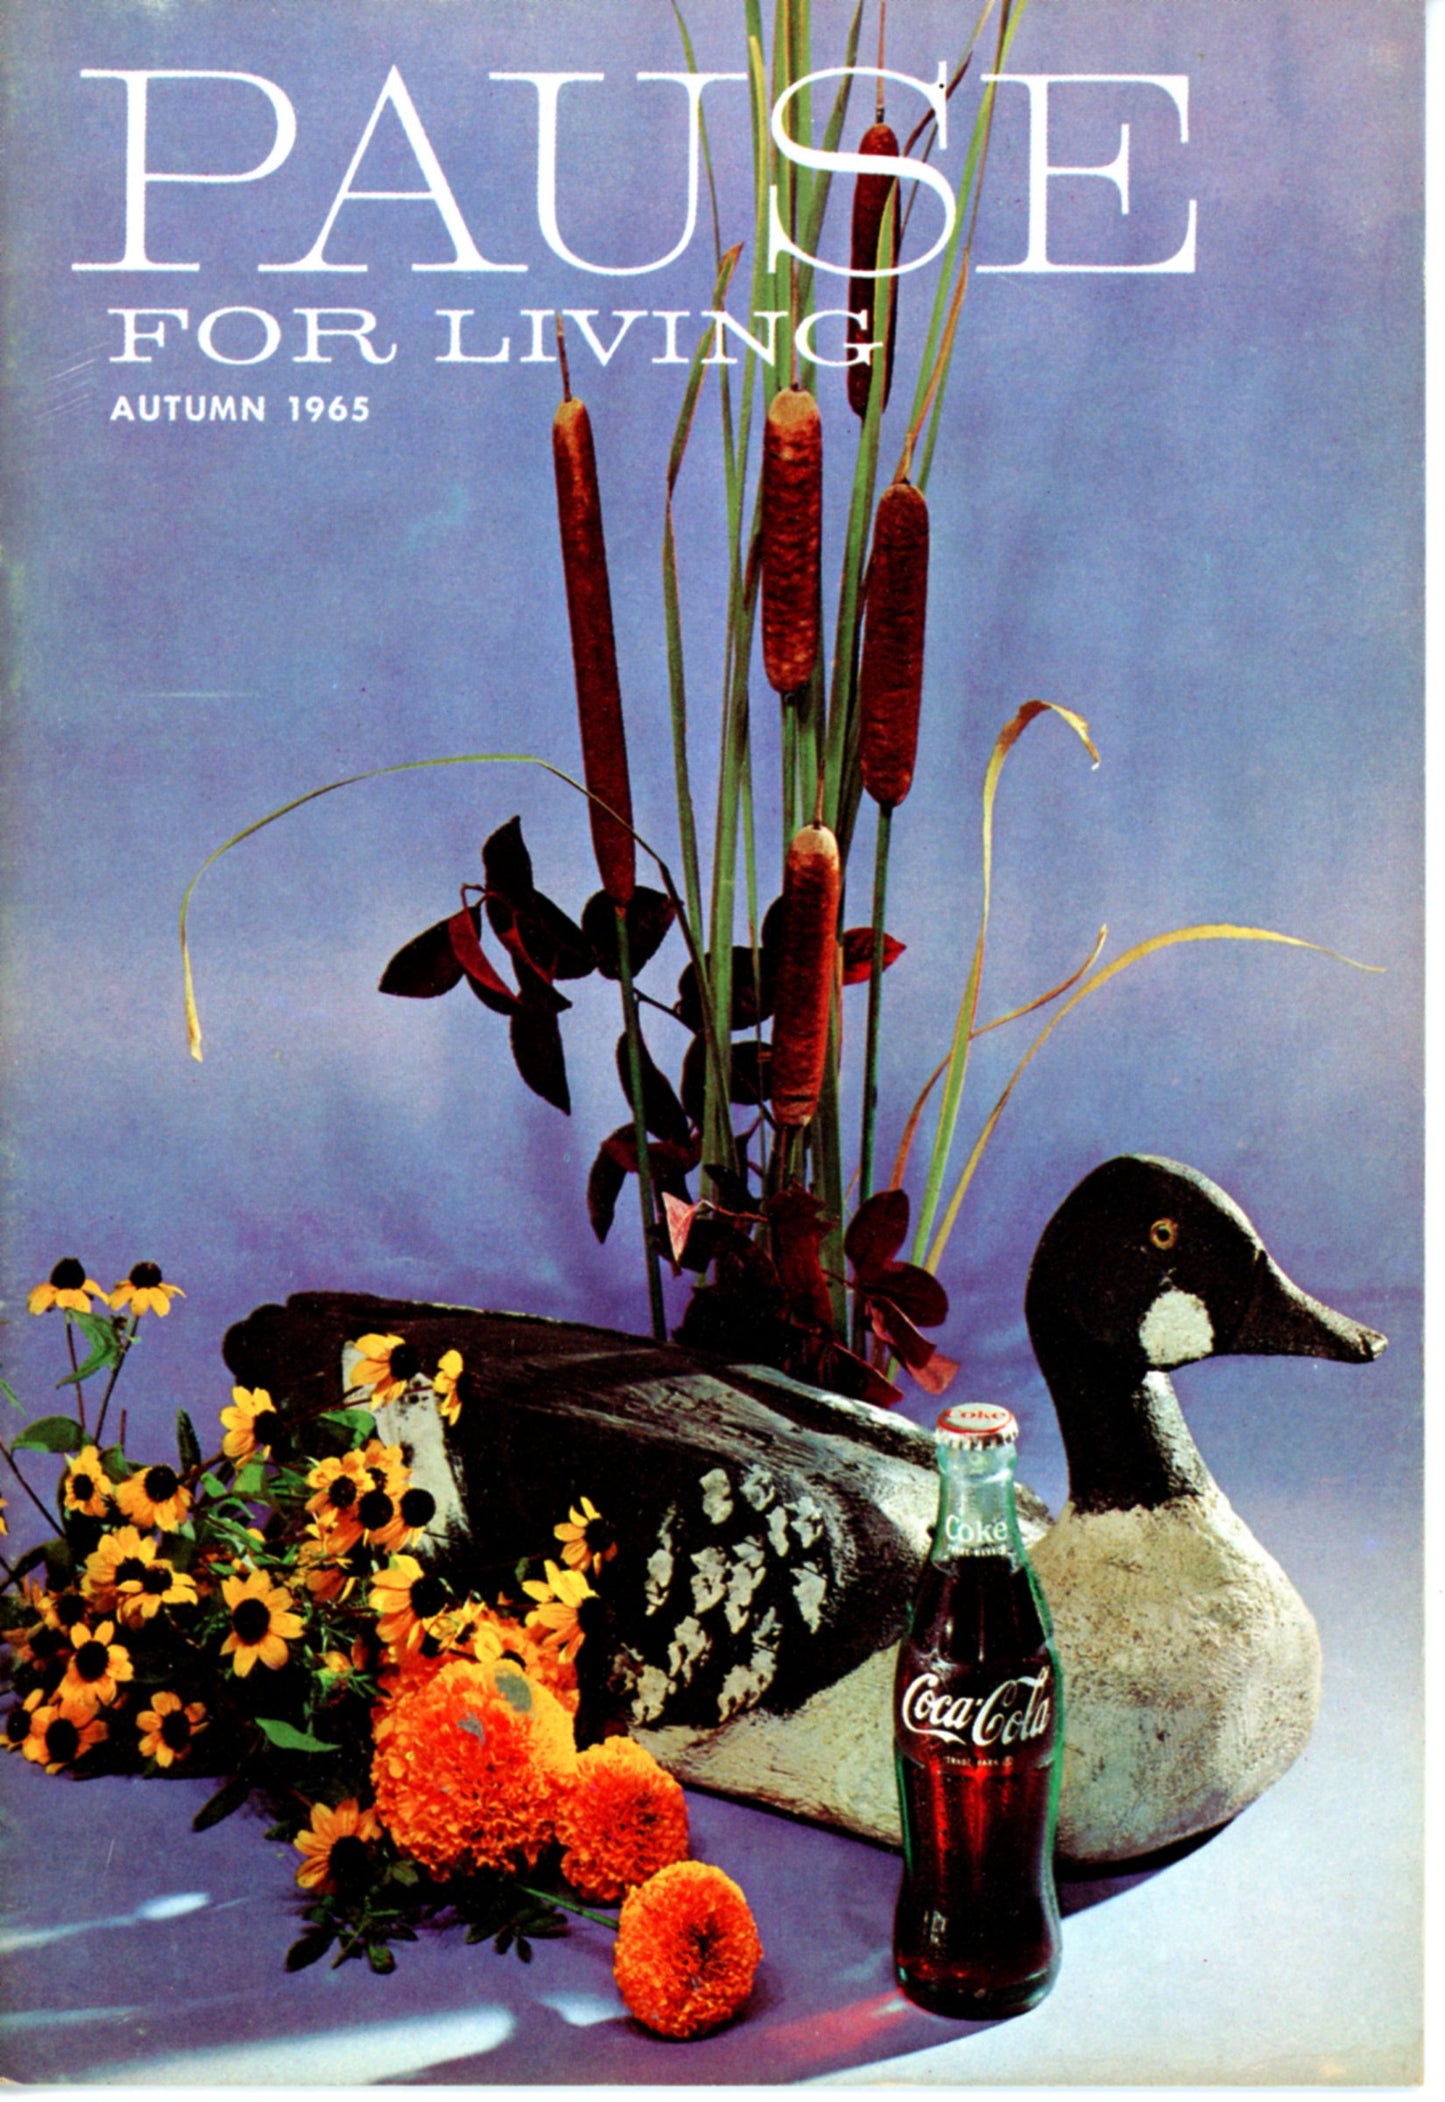 PAUSE FOR LIVING Coca-Cola Advertising Booklet 1956 - 1970 Sold Individually